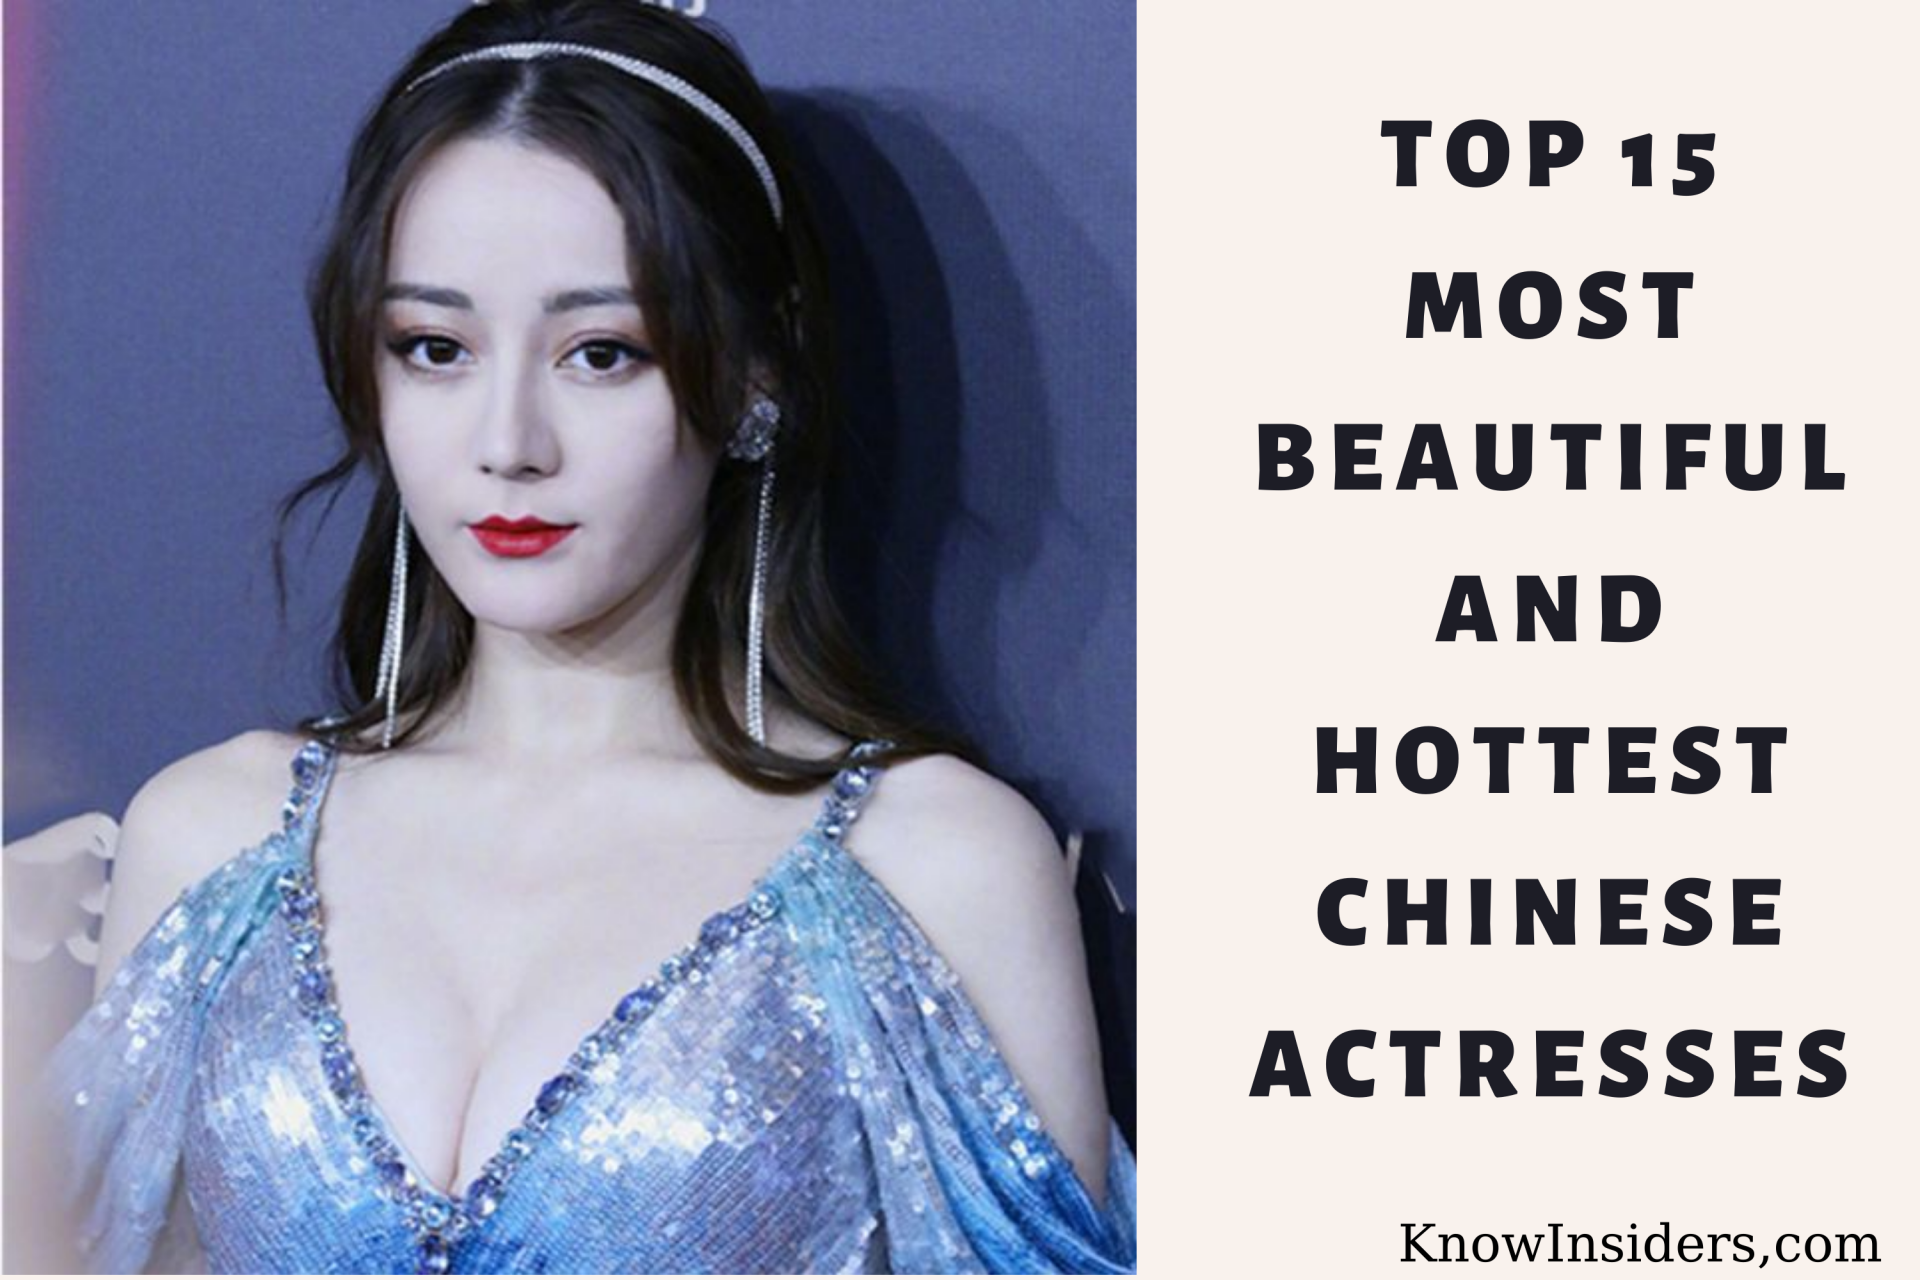 Top 15 Most Beautiful Chinese Actresses Today